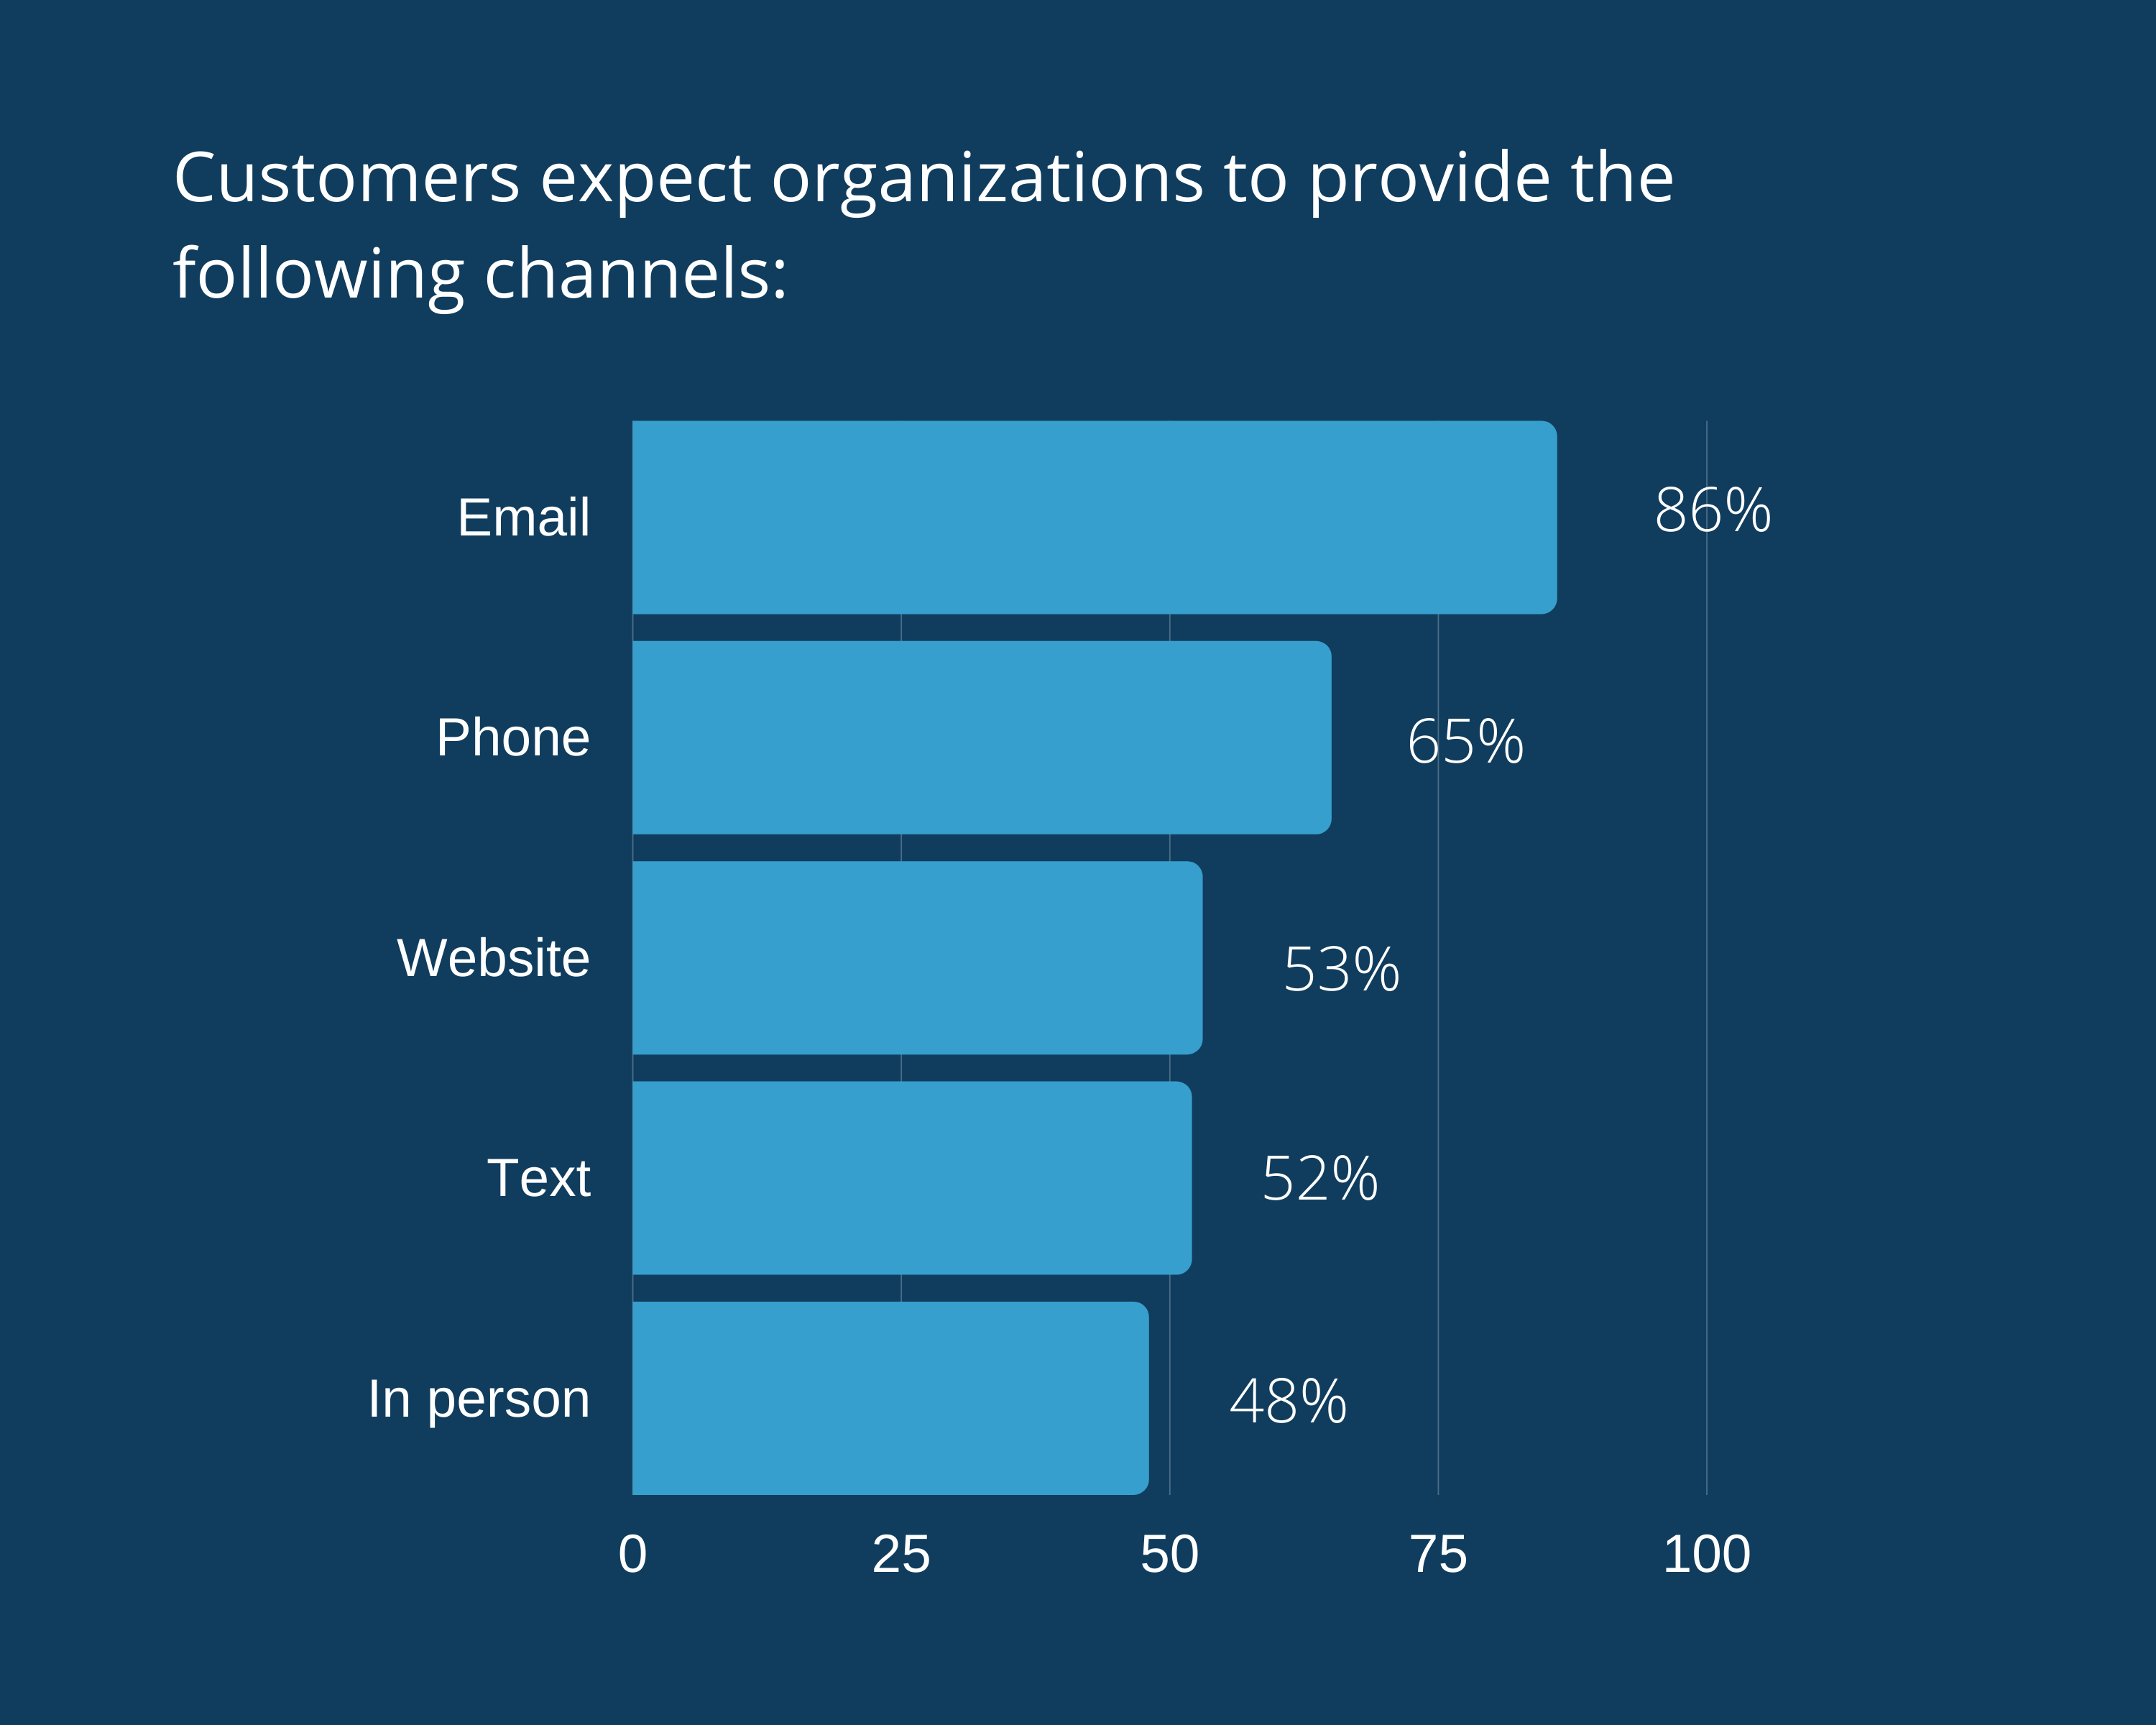 Customers expect organizations to provide the following channels